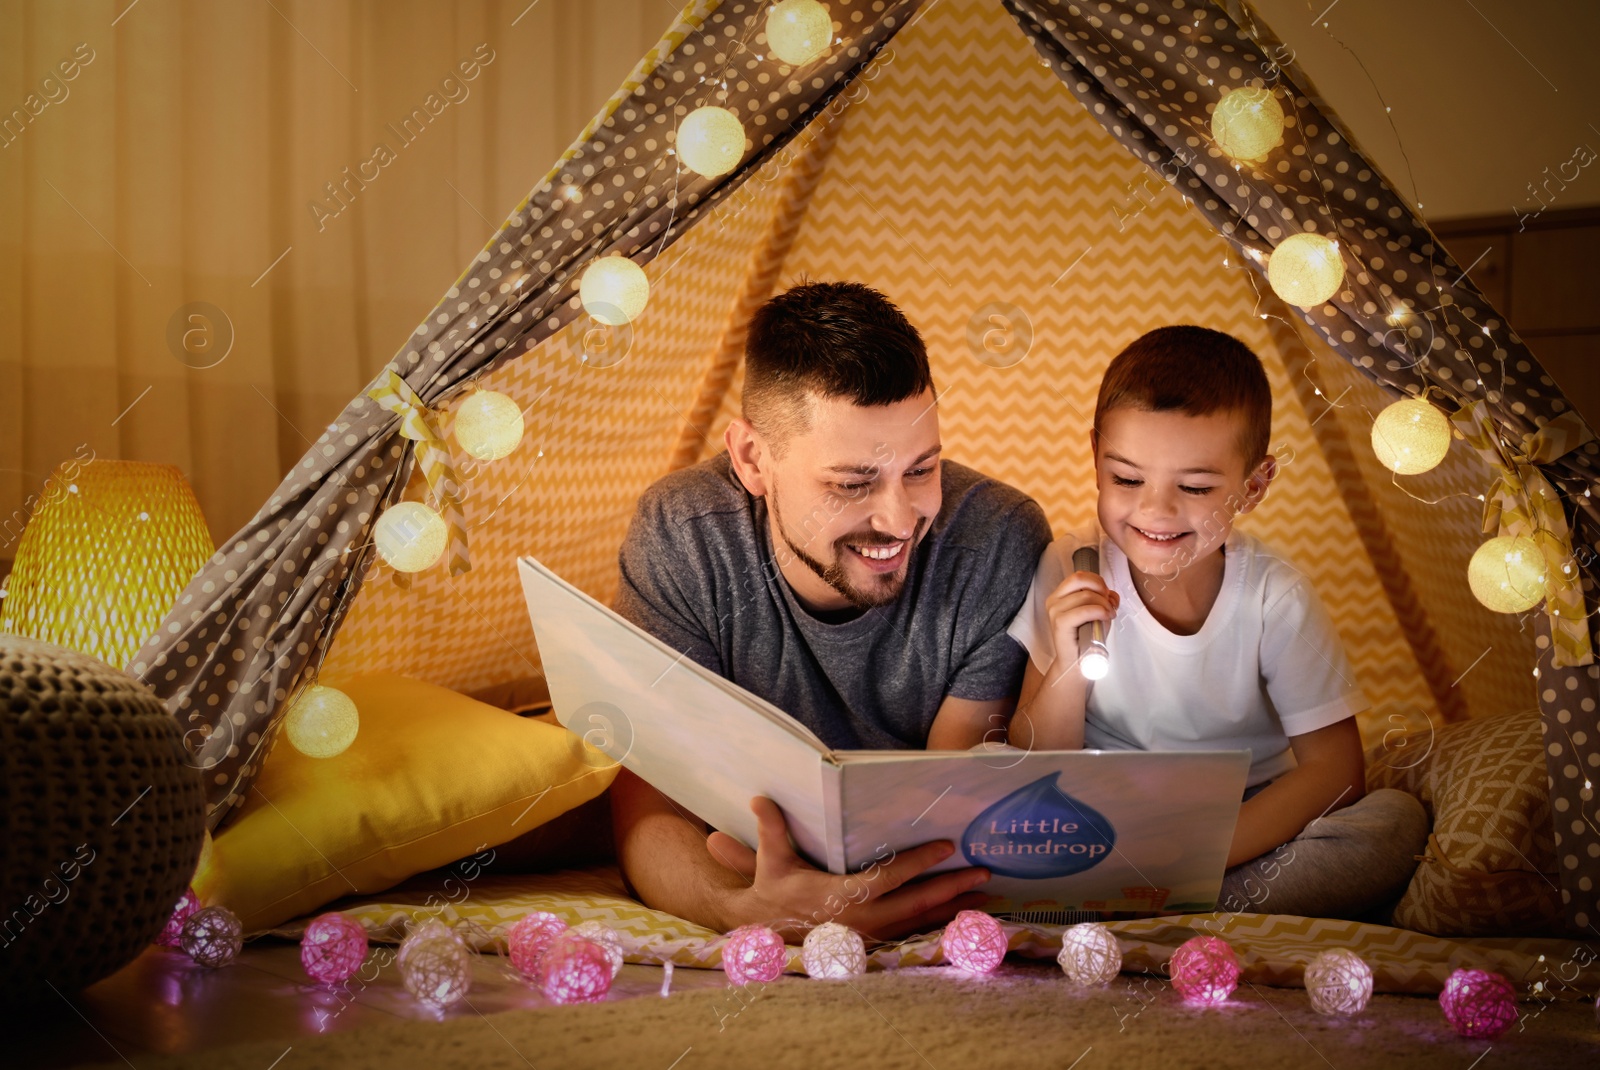 Photo of Father and son with flashlight reading book in play tent